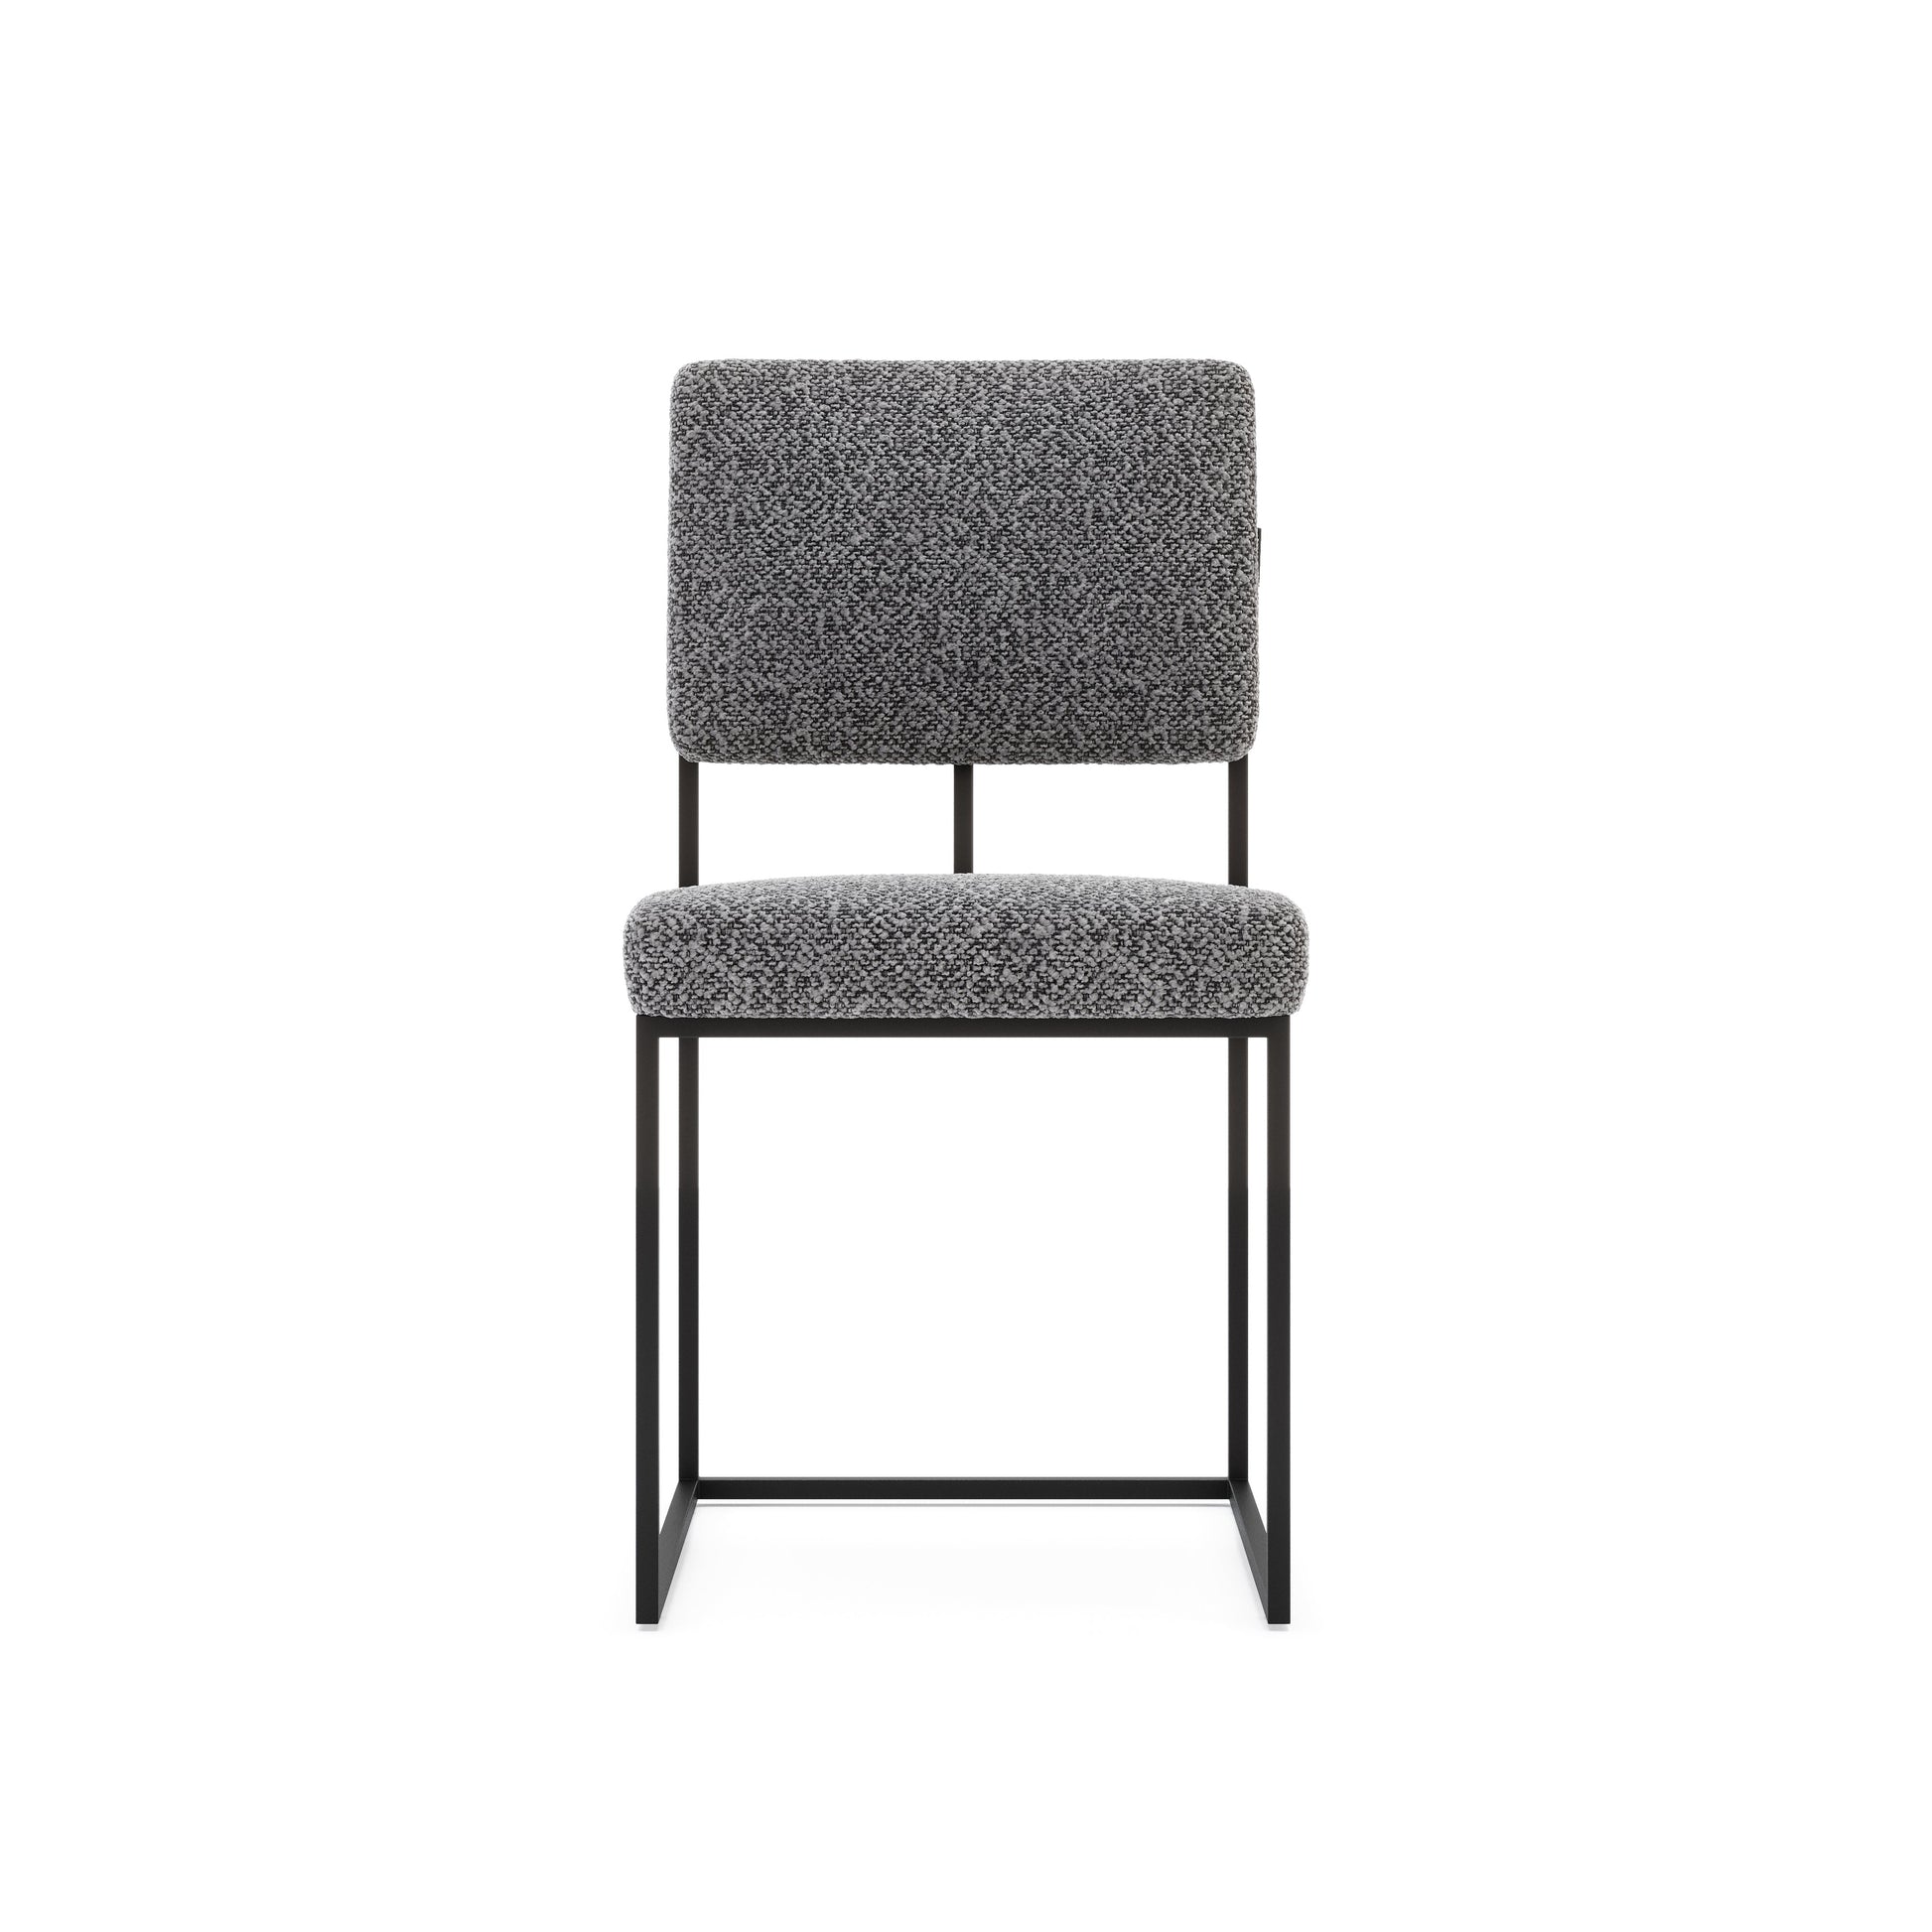 Gram Chair by Domkapa- Boucle (Martindale: 80,000).